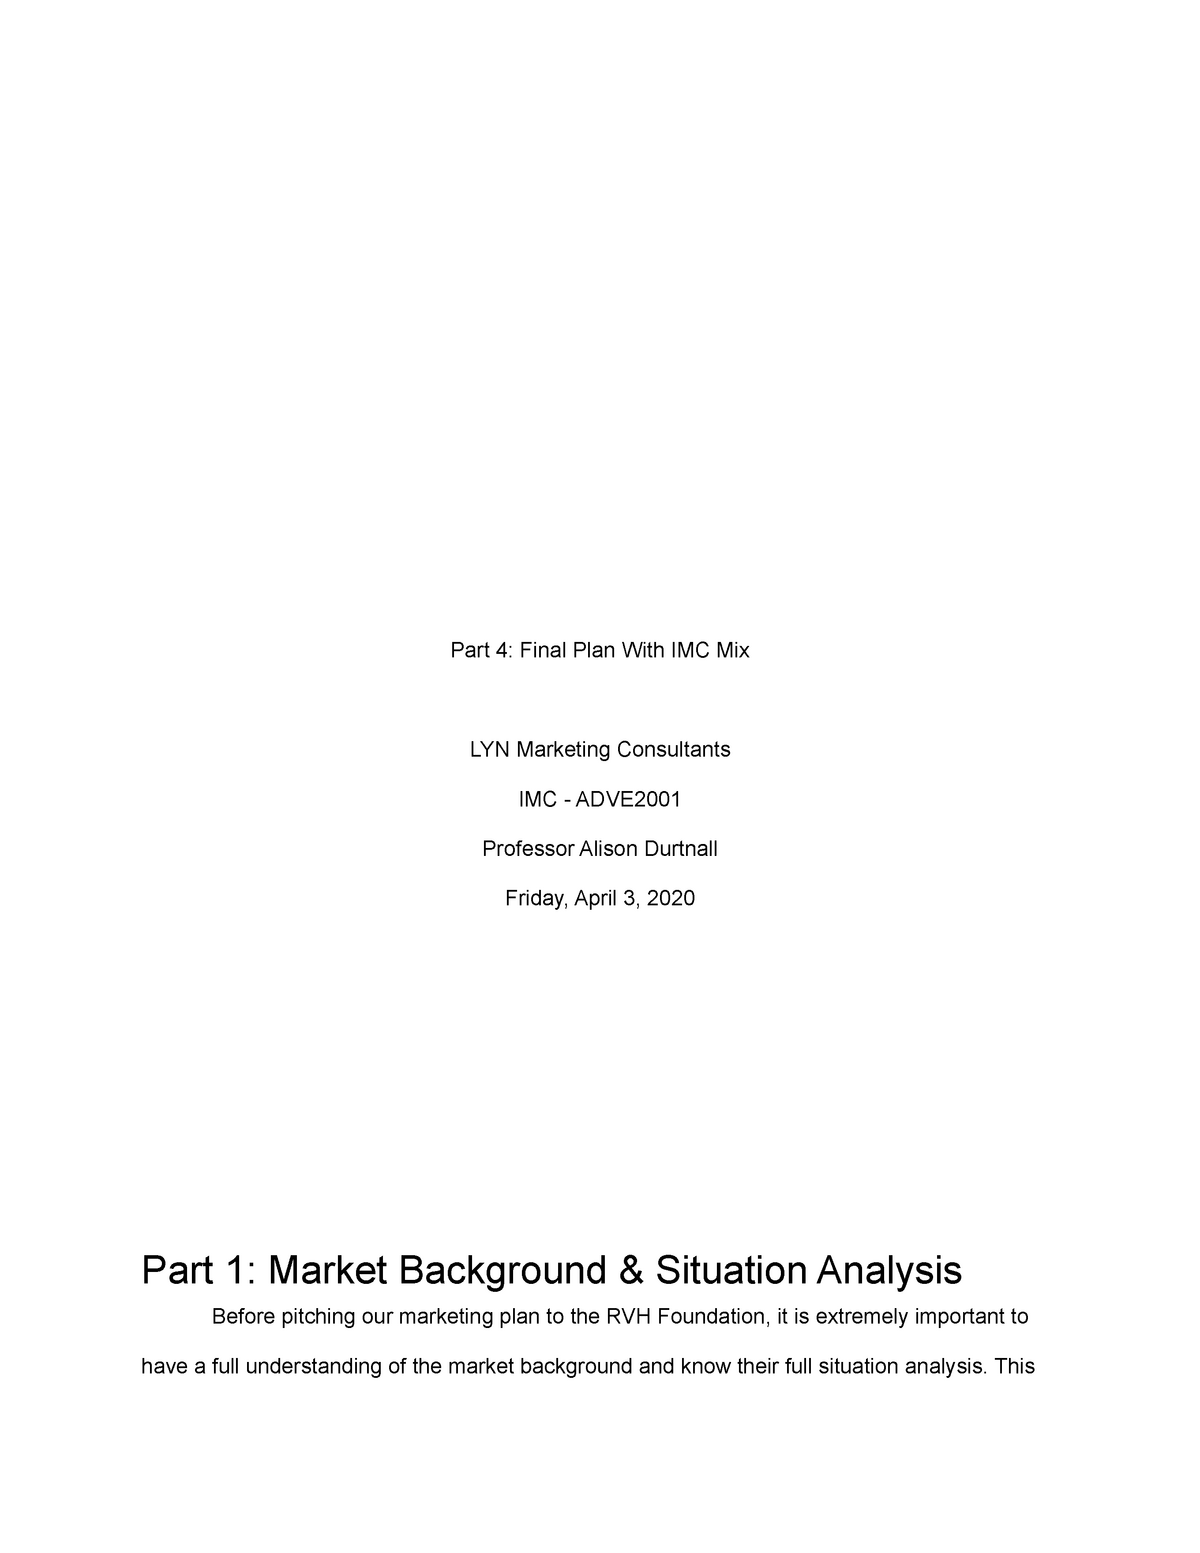 Market Background and Situation Analysis for RVH Foundation - Studocu